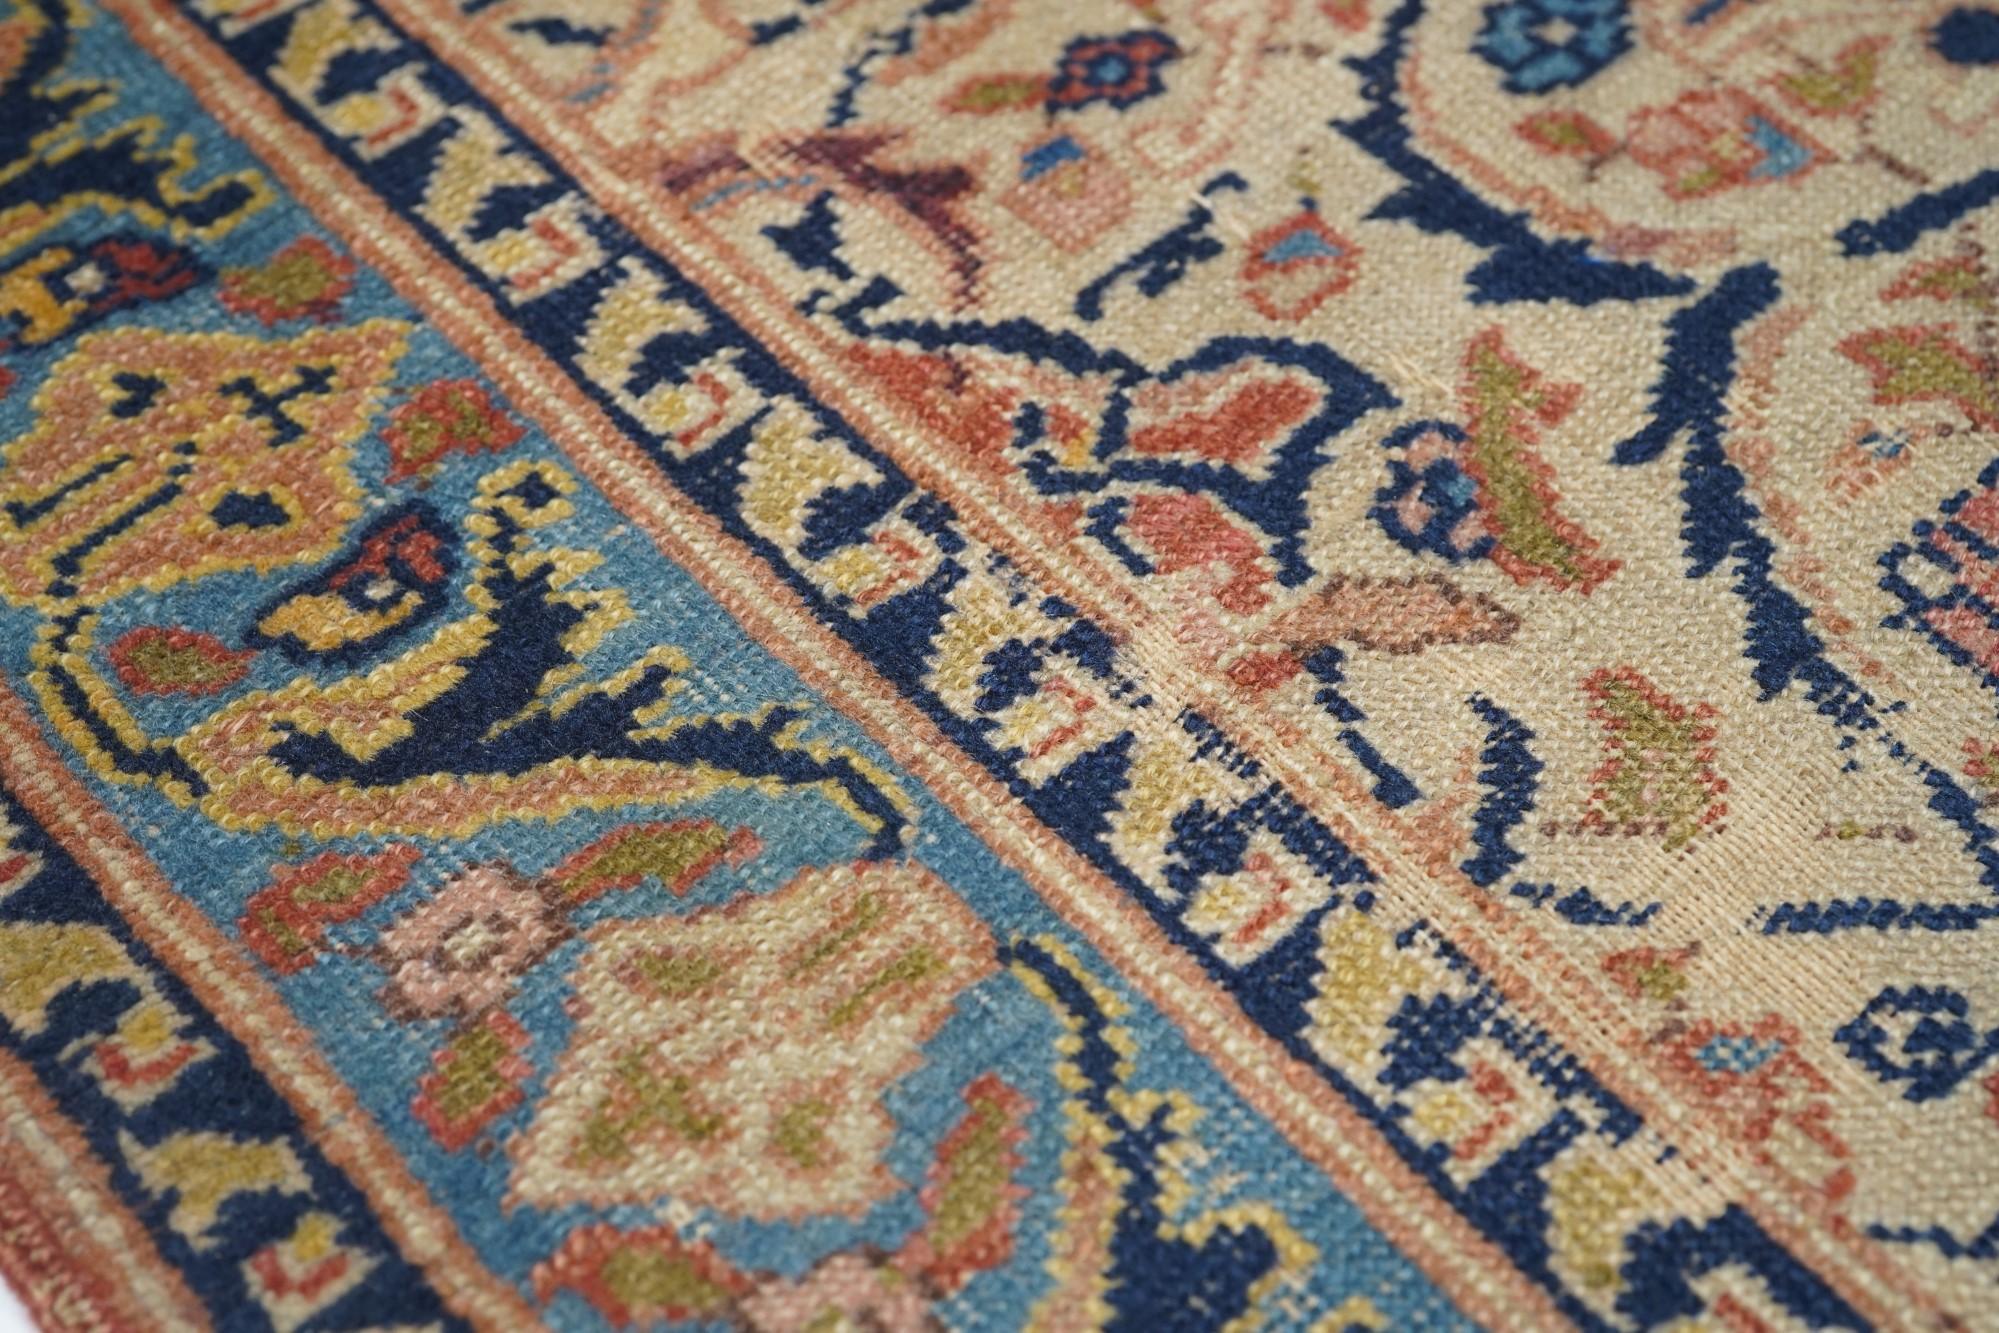 Antique Afshar Rug 3'5'' x 4'6'' In Excellent Condition For Sale In New York, NY